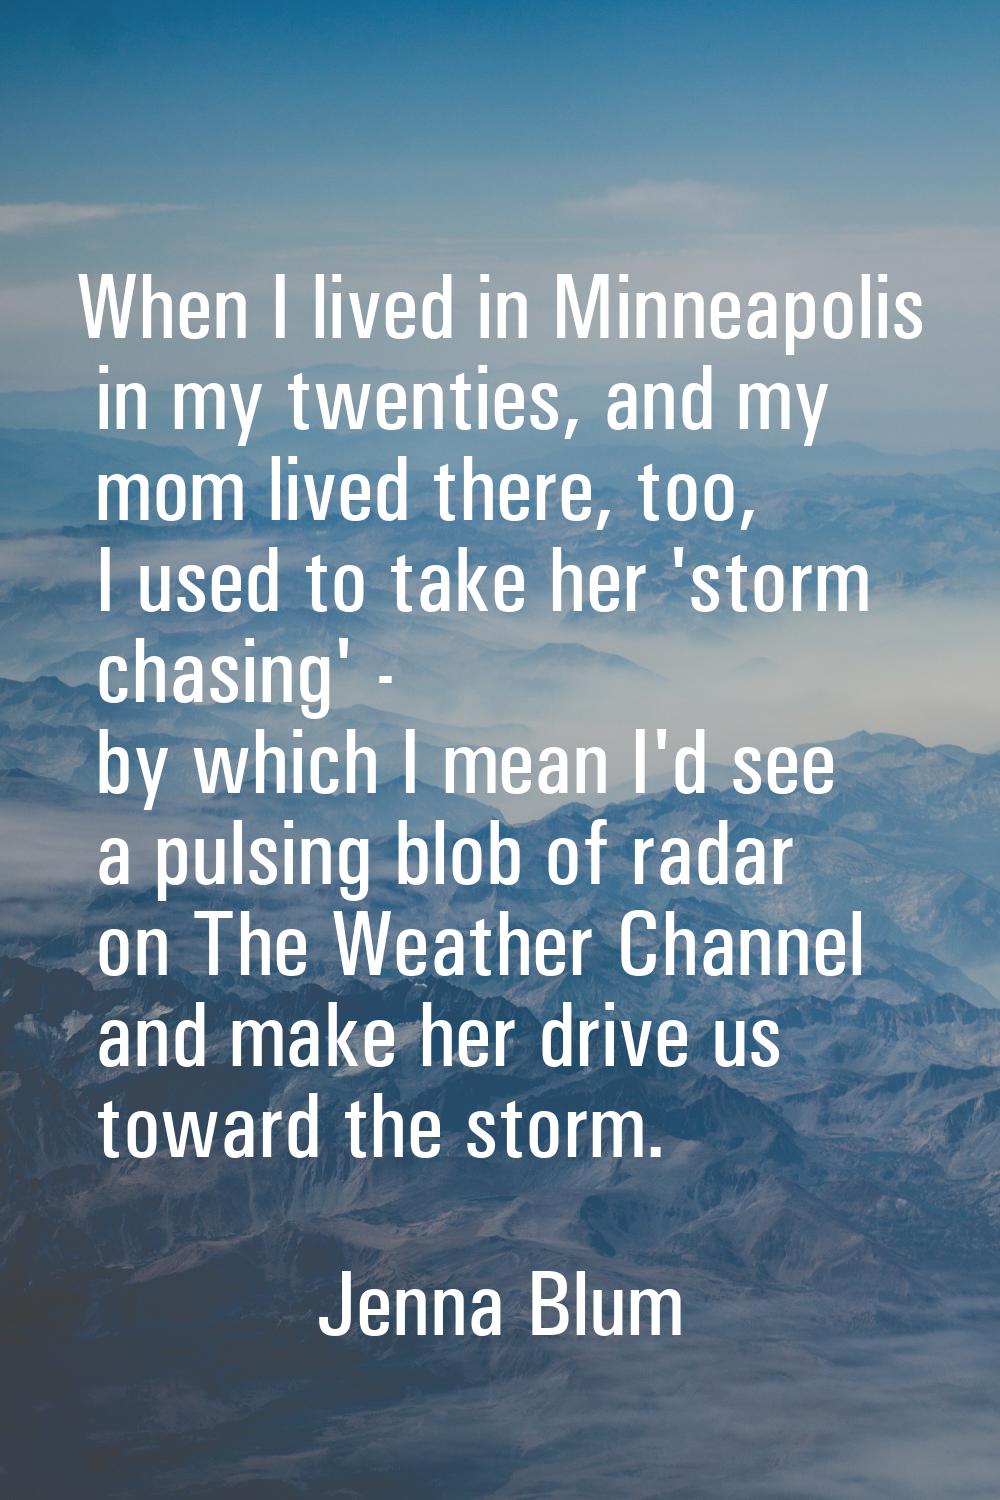 When I lived in Minneapolis in my twenties, and my mom lived there, too, I used to take her 'storm 